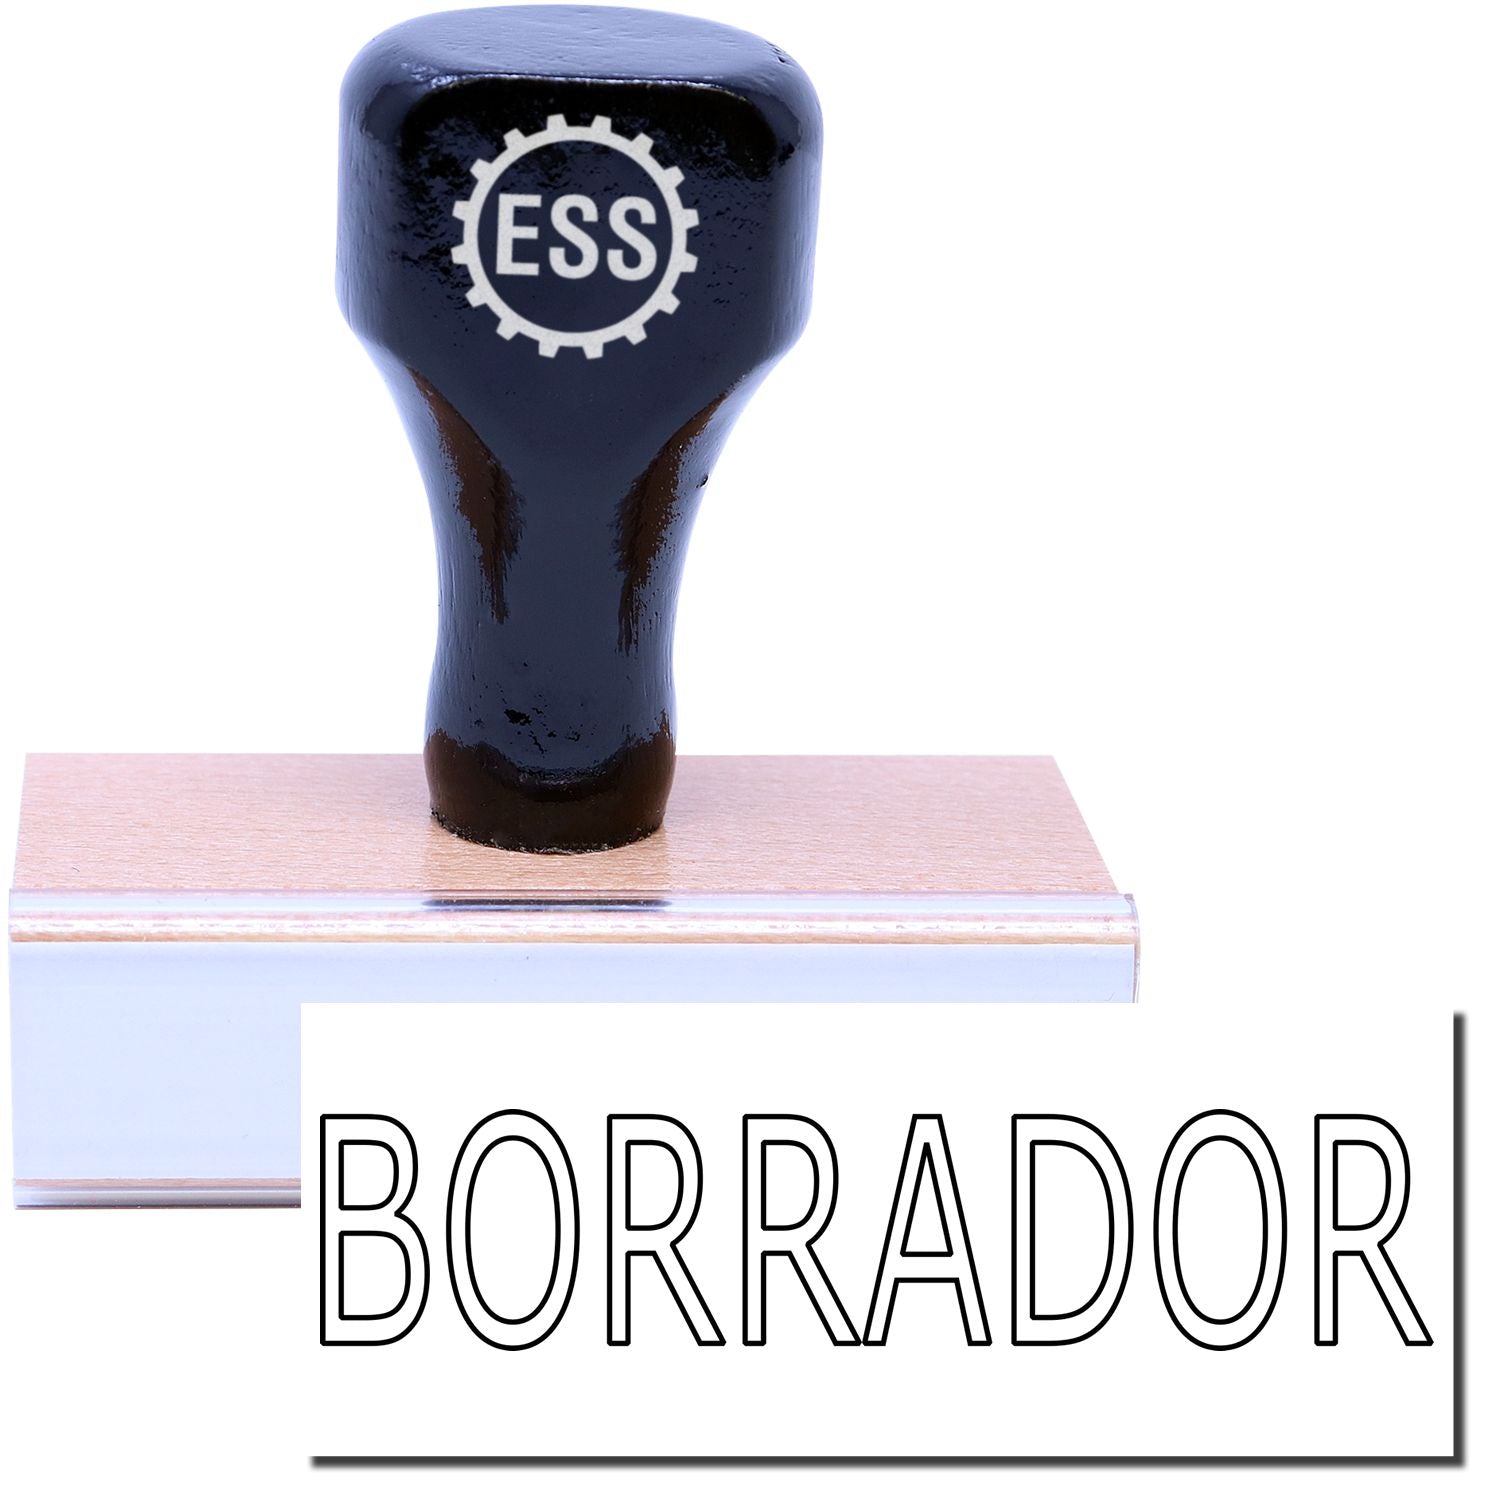 A stock office rubber stamp with a stamped image showing how the text "BORRADOR" in an outline font is displayed after stamping.